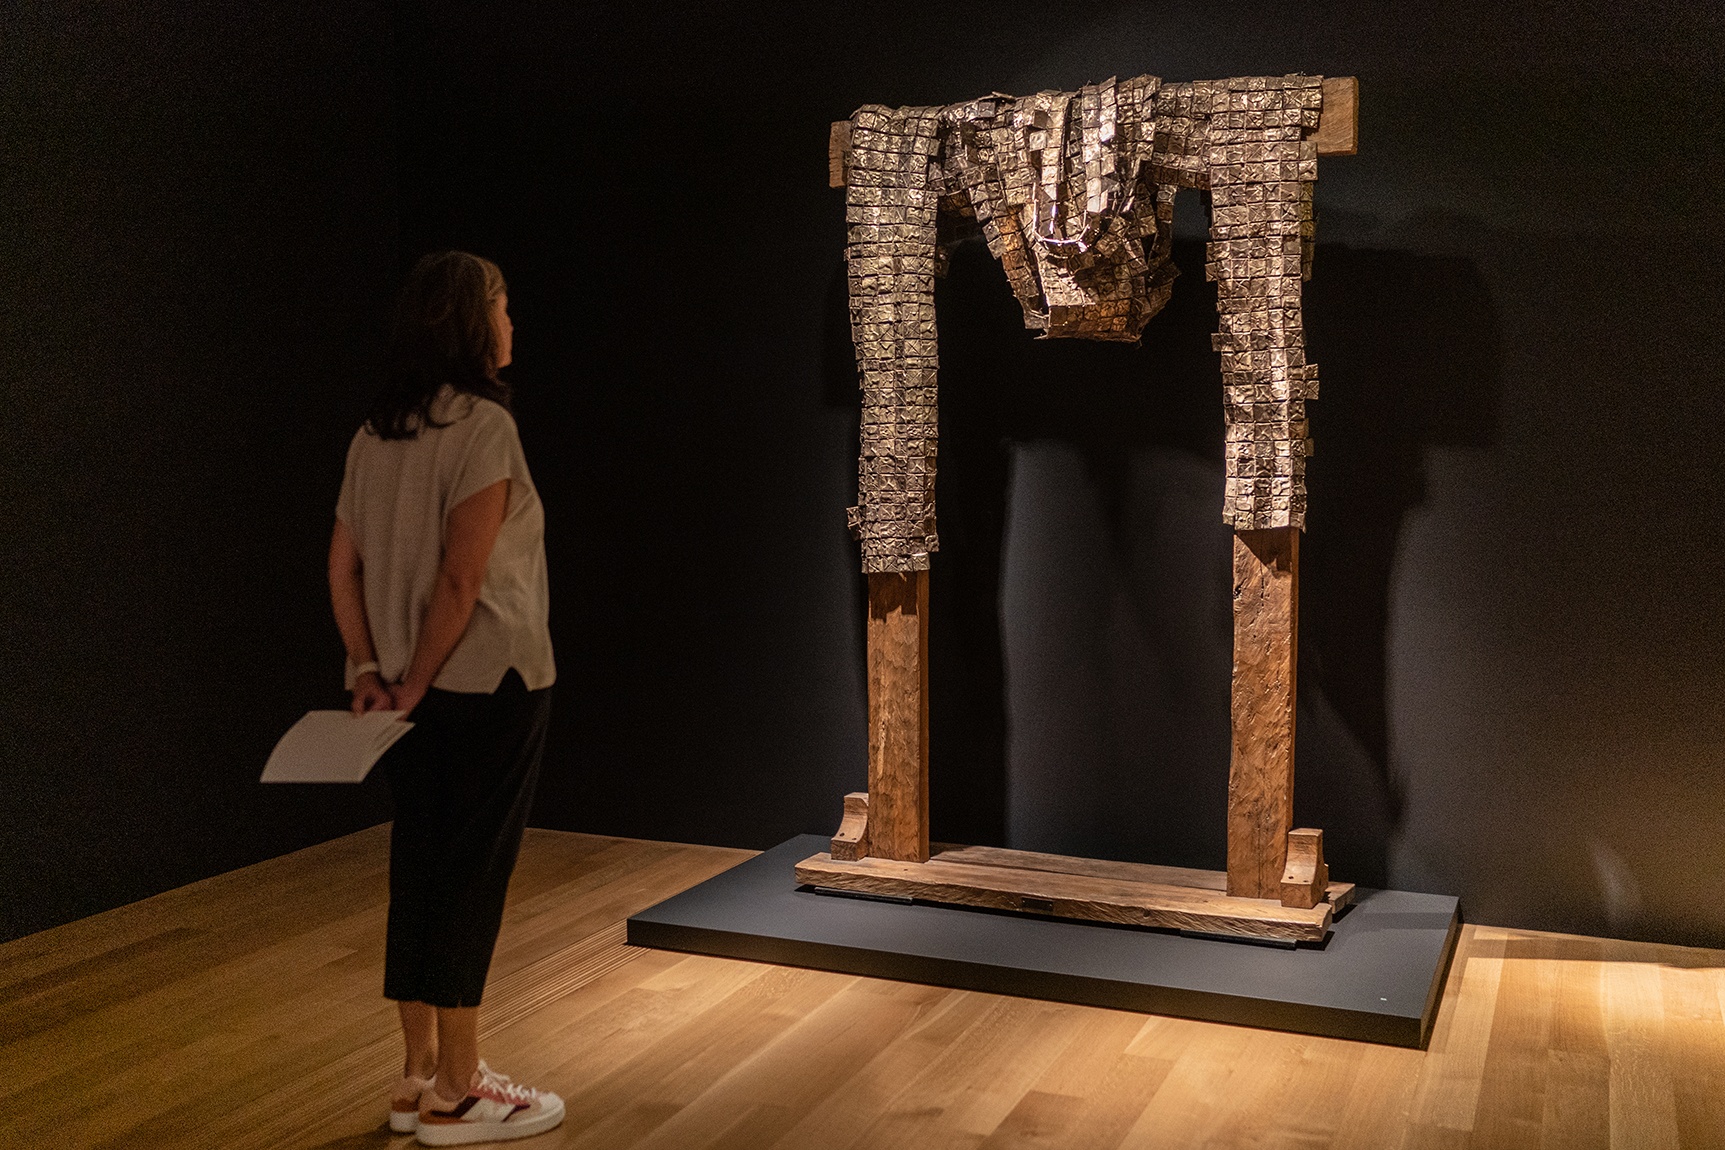 Opening reception of "Barbara Chase-Riboud" Monumentale: "The Bronzes" at the Pulitzer Arts Foundation